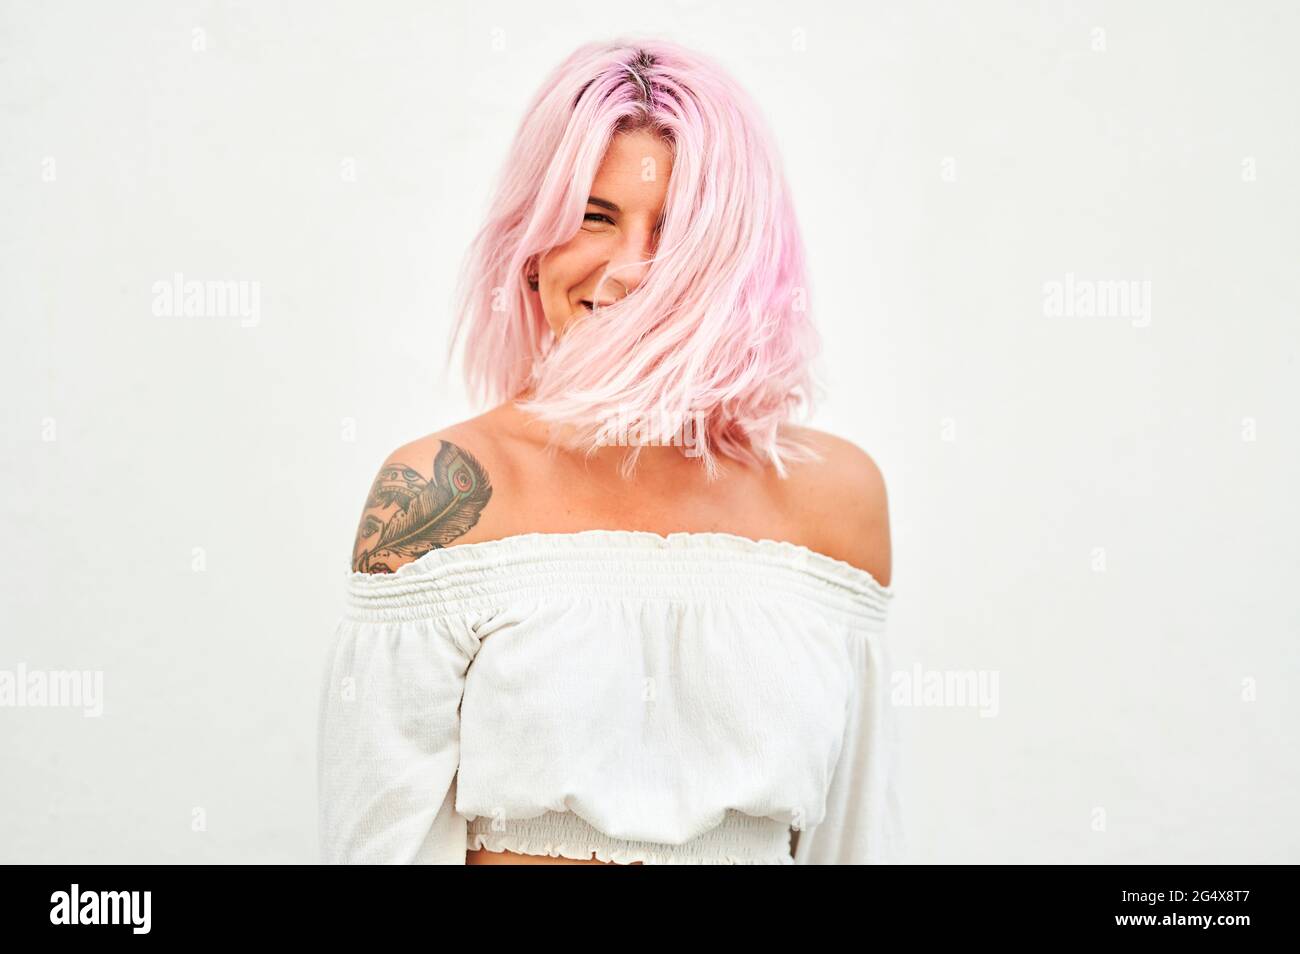 Young woman tossing hair in front of white wall Stock Photo